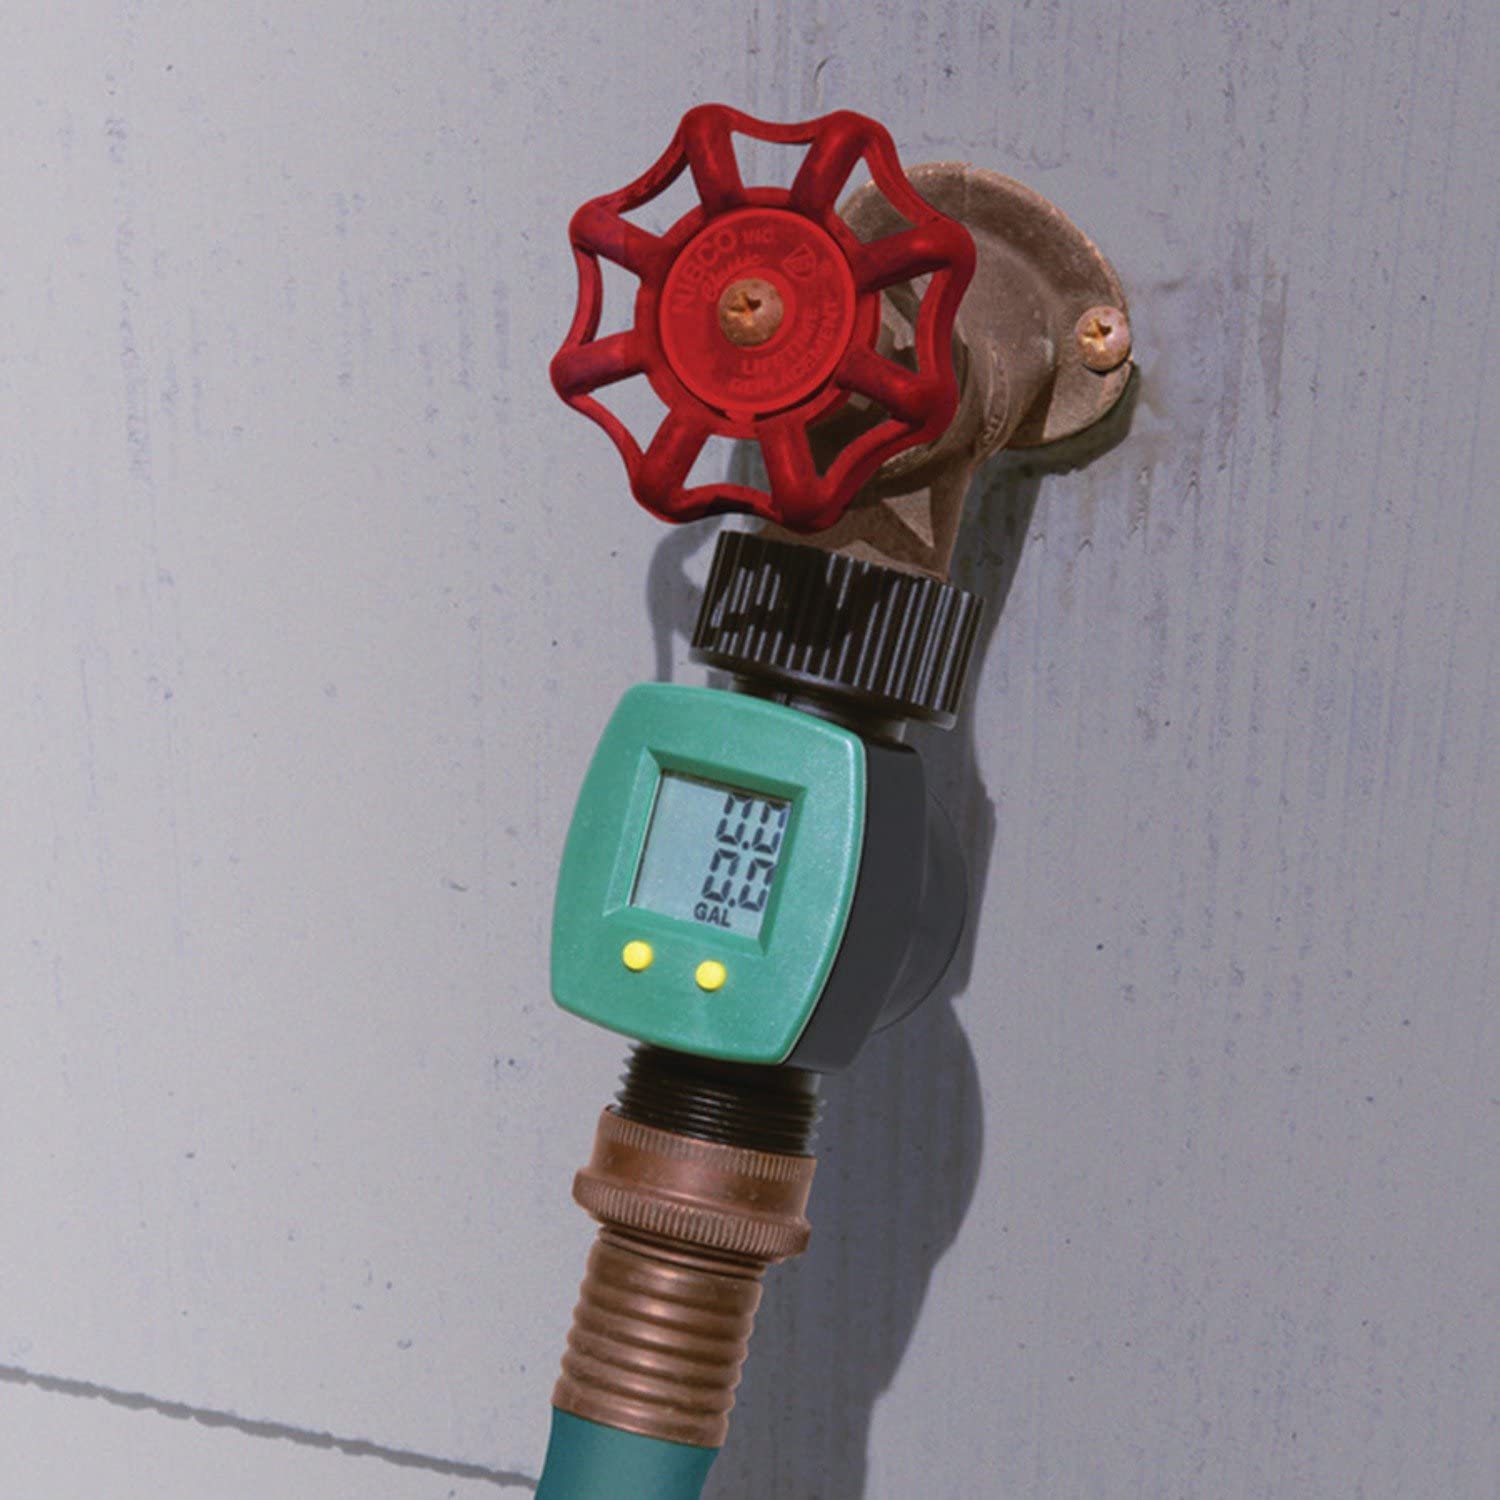 A meter installed inline with a water hose